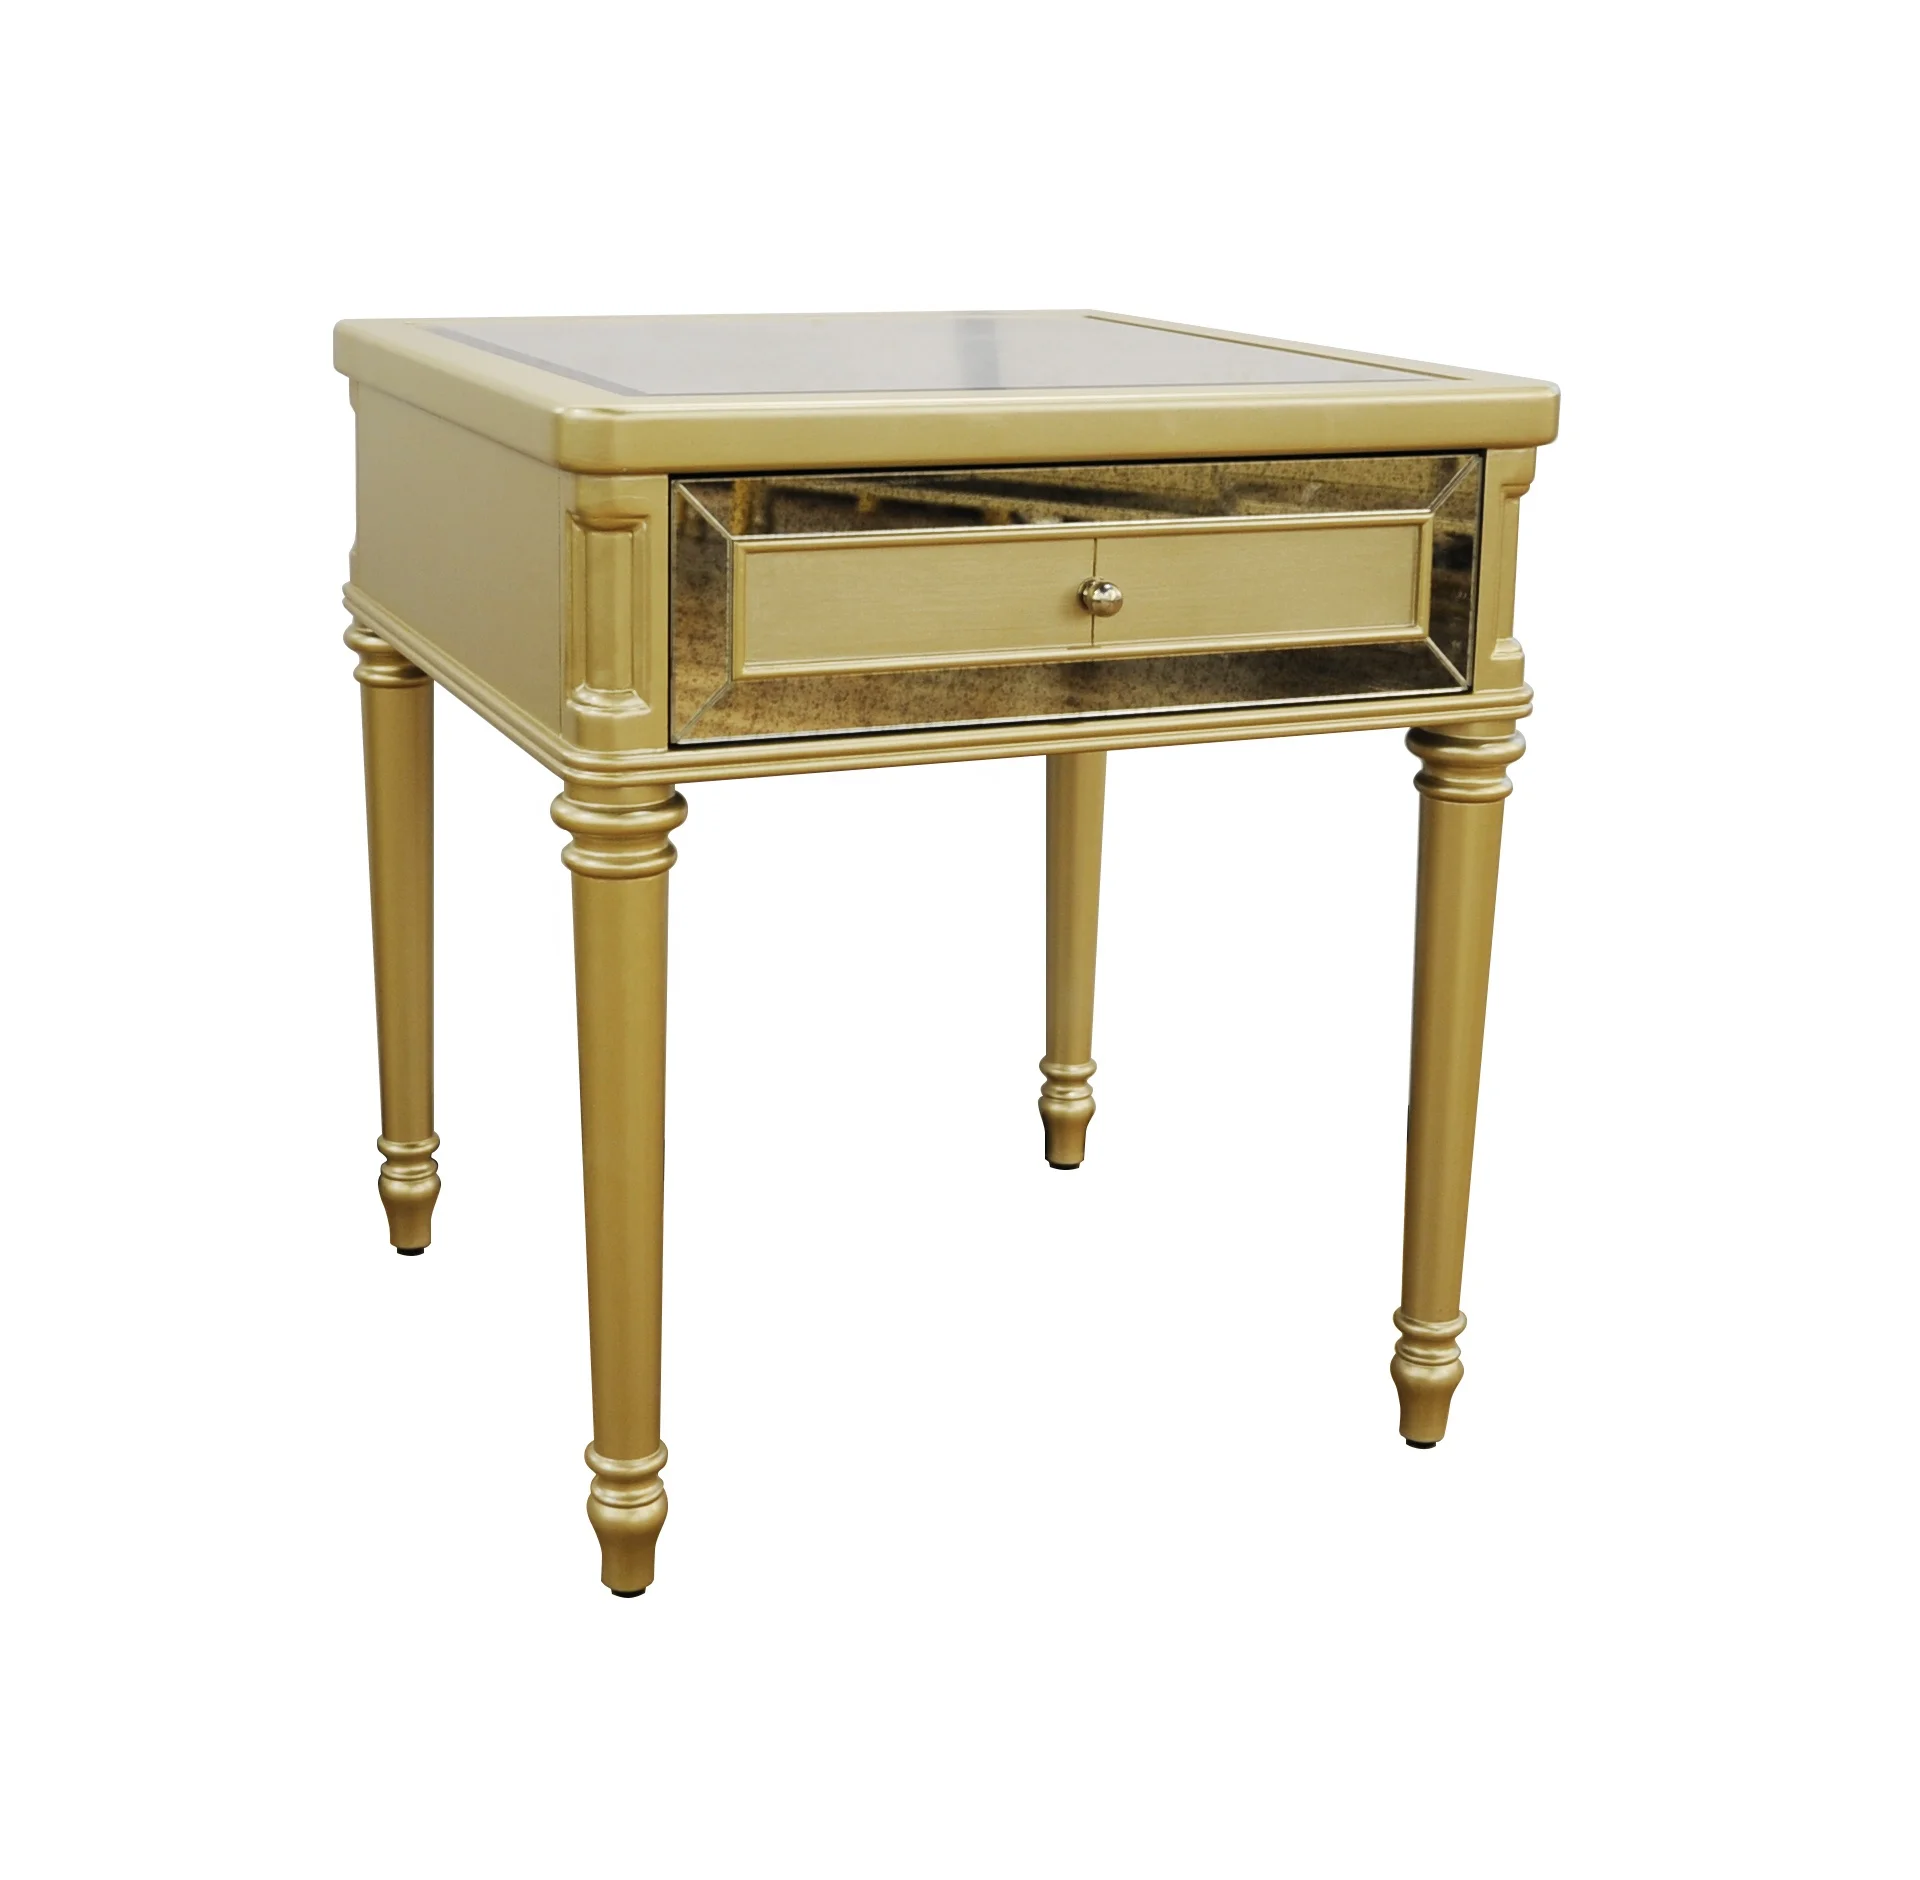 Modern Fashion Hot Selling Handmade Gold Painted Antique Mirror End table with 1 drawer Nightstand Side table